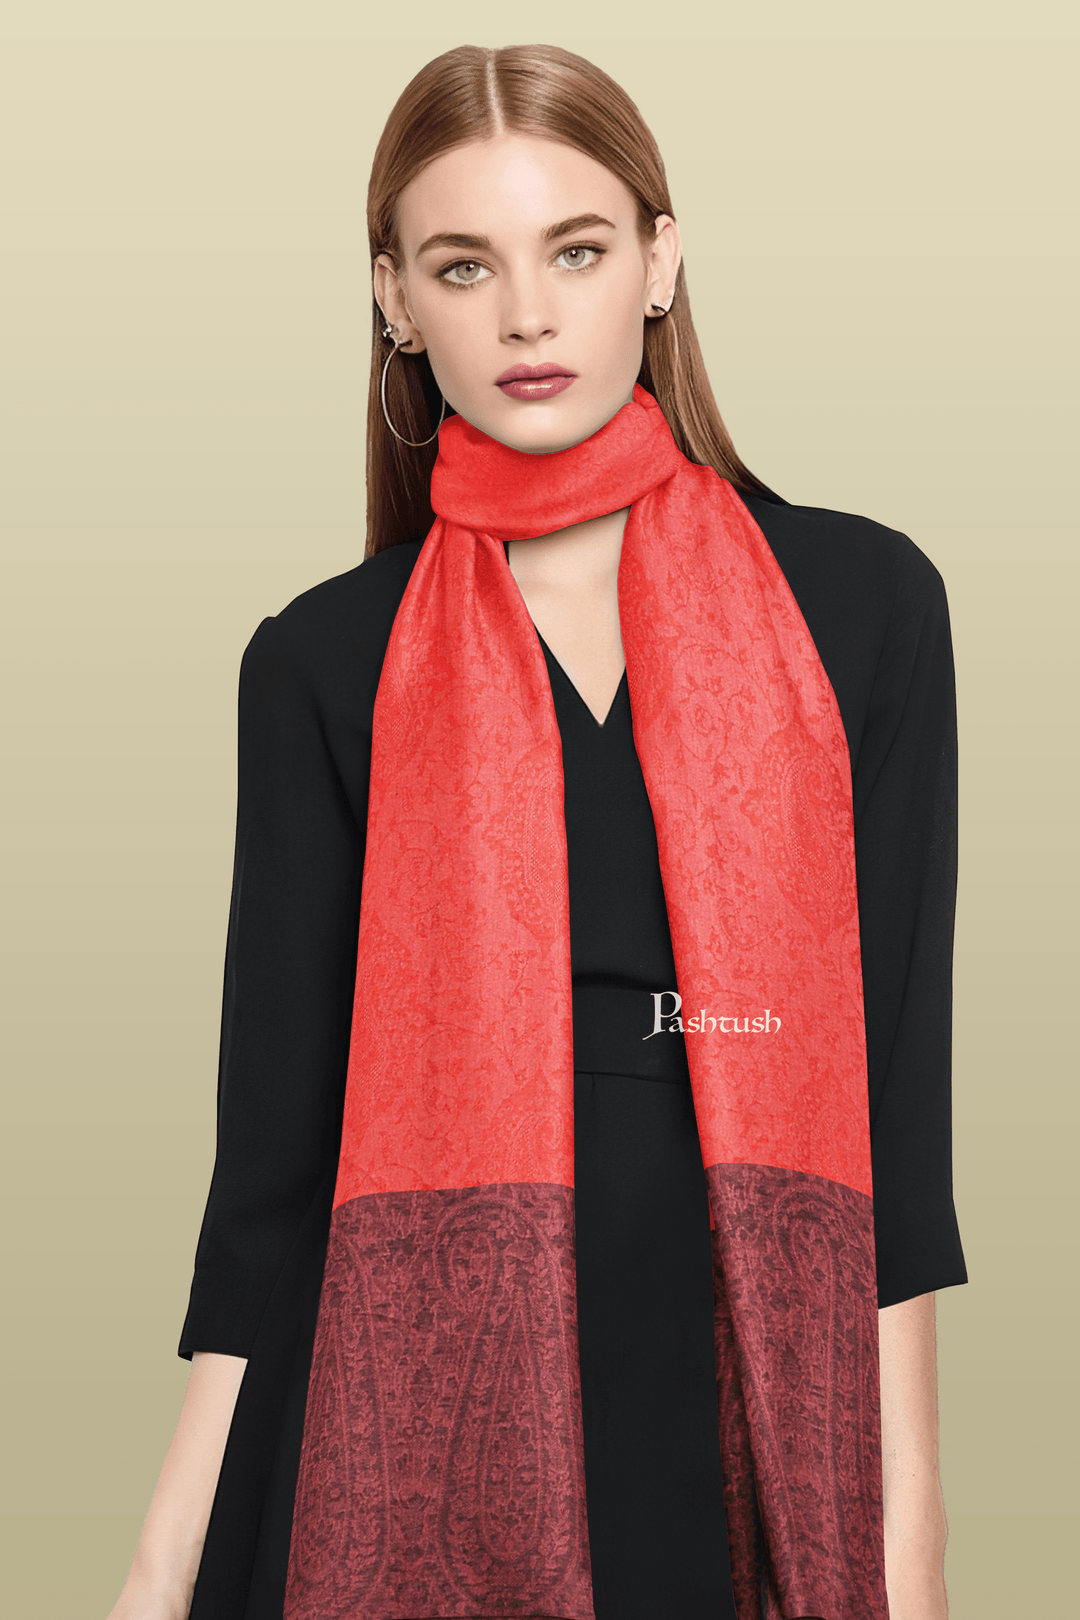 Pashtush India womens scarf and Stoles Pashtush Womens Bamboo Scarf, Woven Paisley Soft And Natural, Red